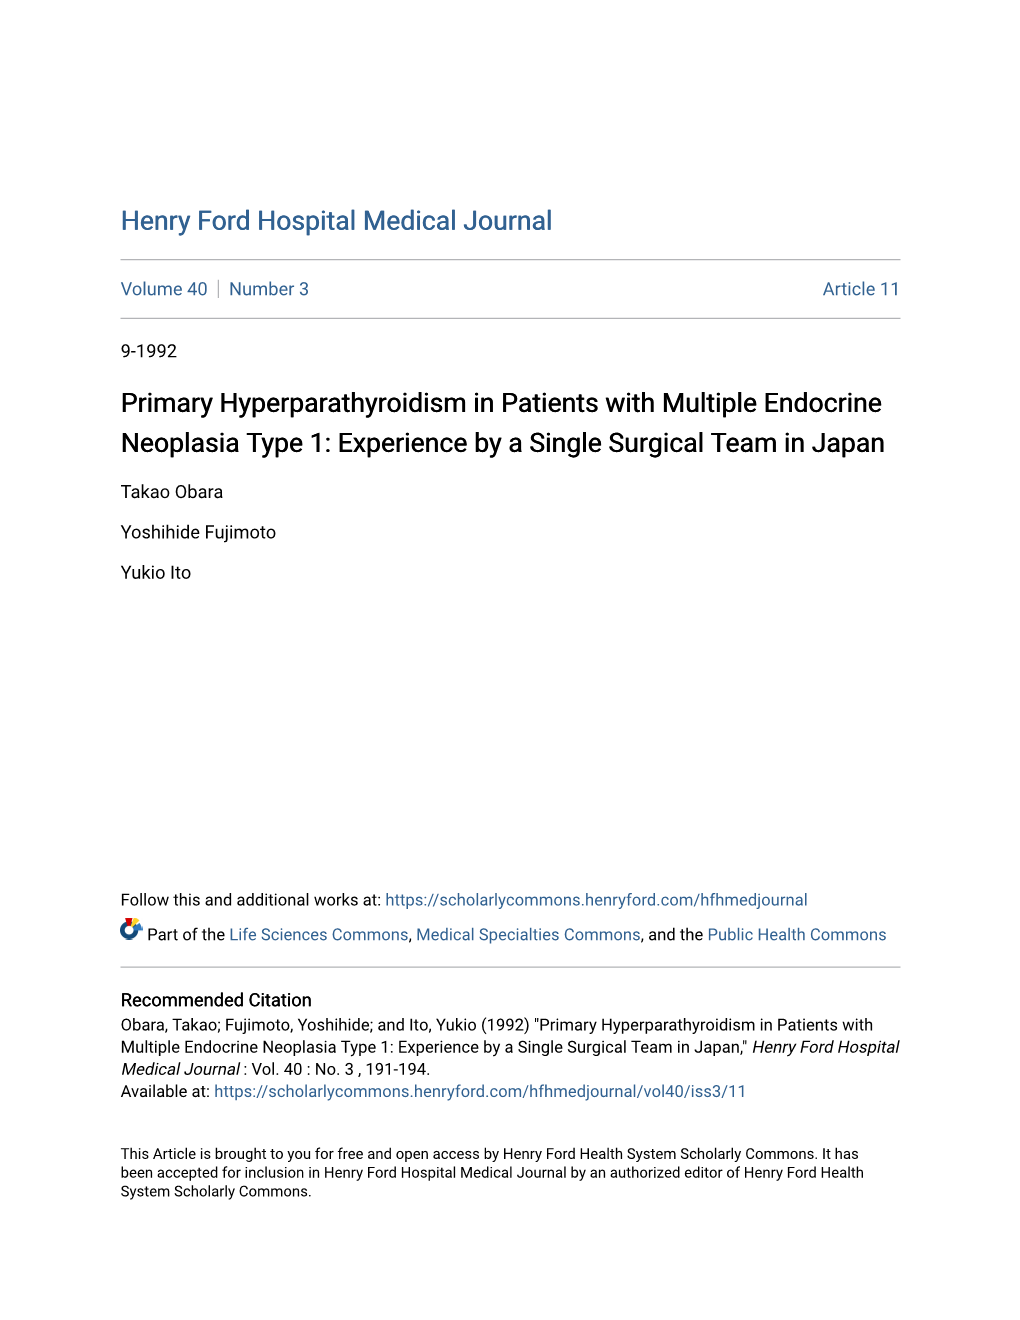 Primary Hyperparathyroidism in Patients with Multiple Endocrine Neoplasia Type 1: Experience by a Single Surgical Team in Japan